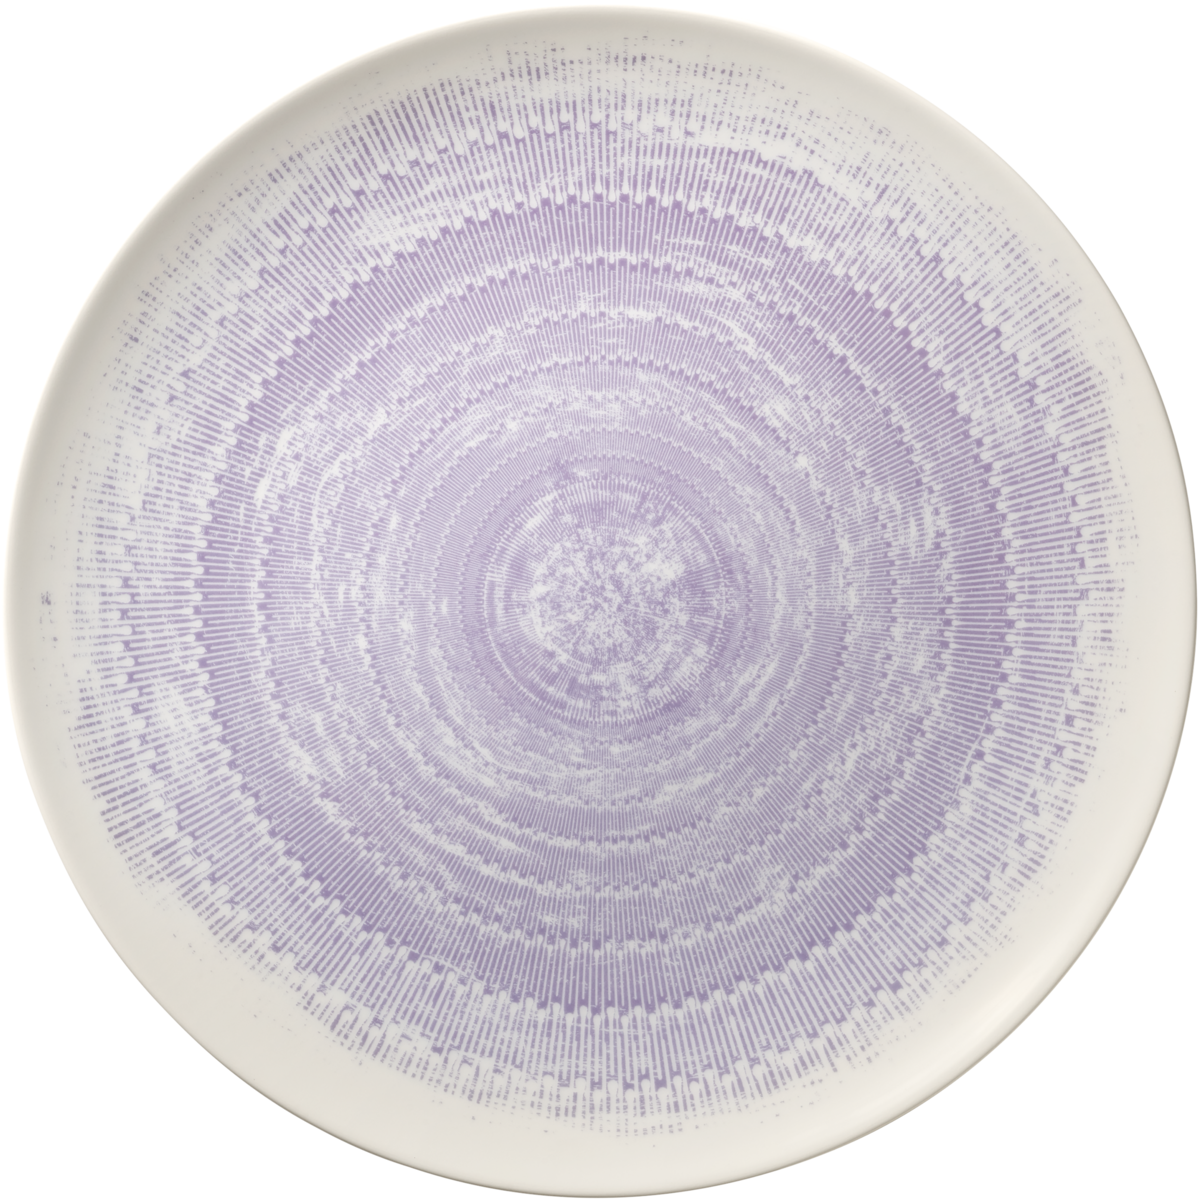 Plate flat round coupe 27cm